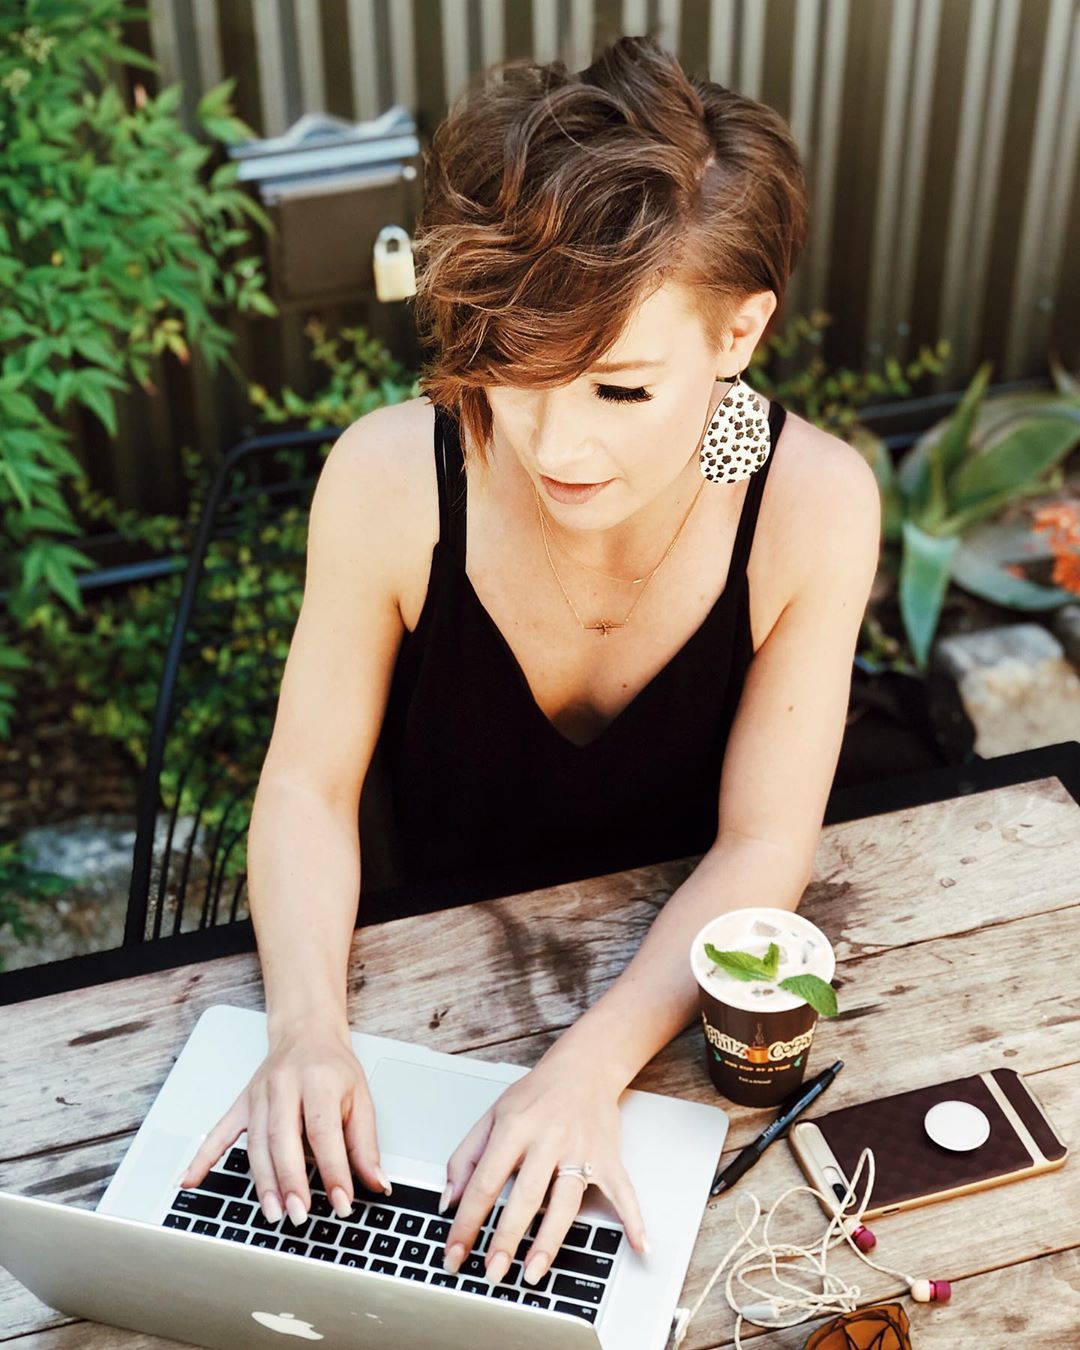 Young woman typing on laptop outside. Photo by Instagram user @kaitlynn.guzman